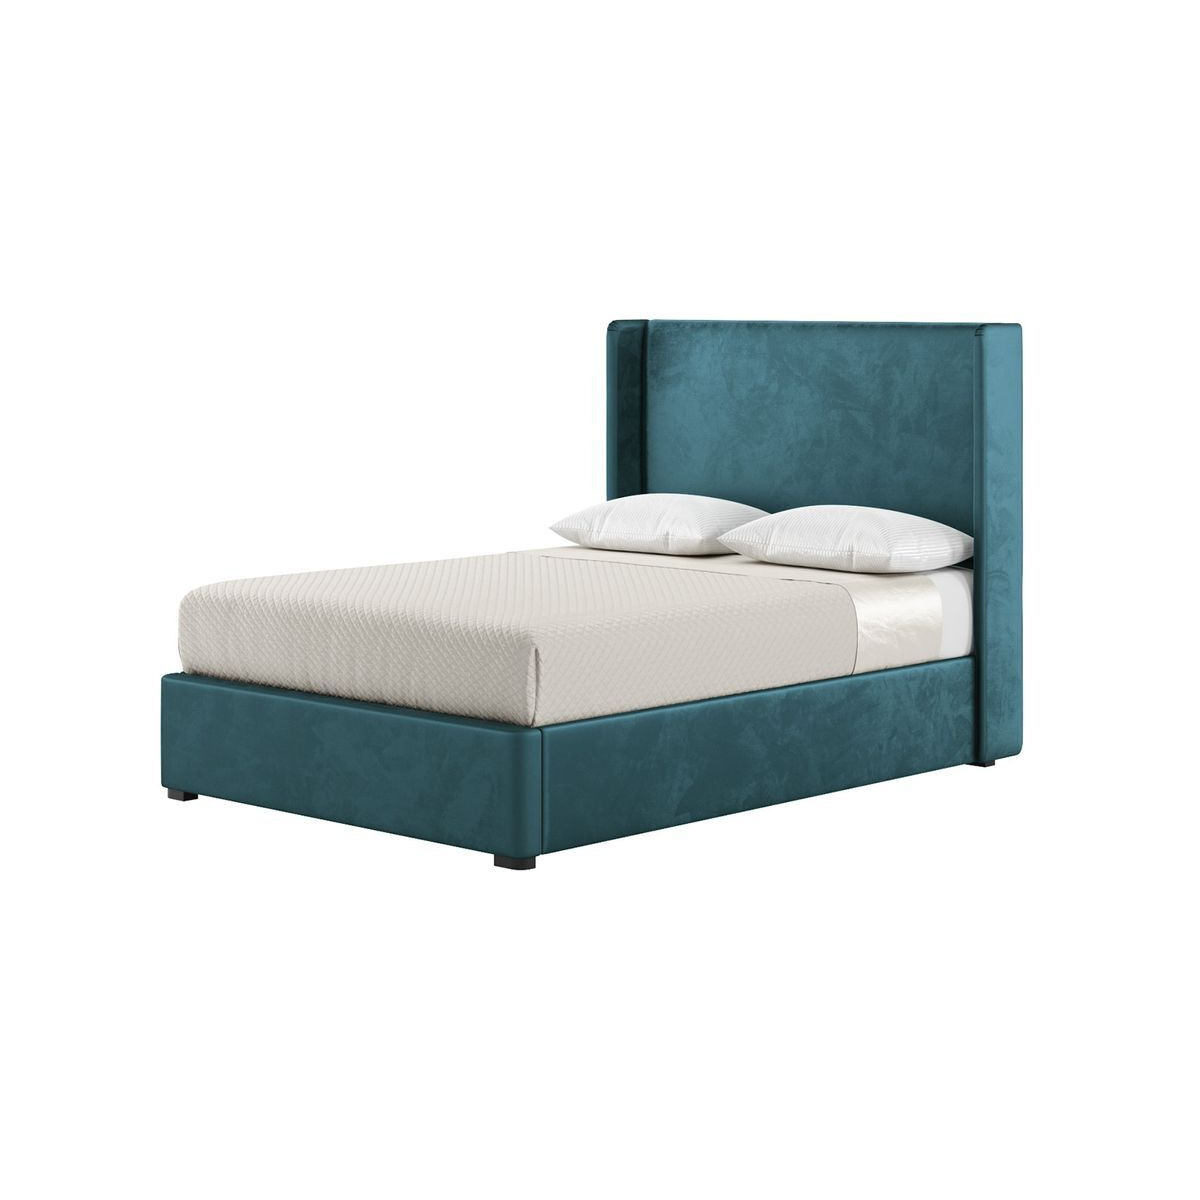 Darcy 4ft6 Double Bed Frame With Modern Smooth Wing Headboard, dirty blue, Leg colour: black - image 1